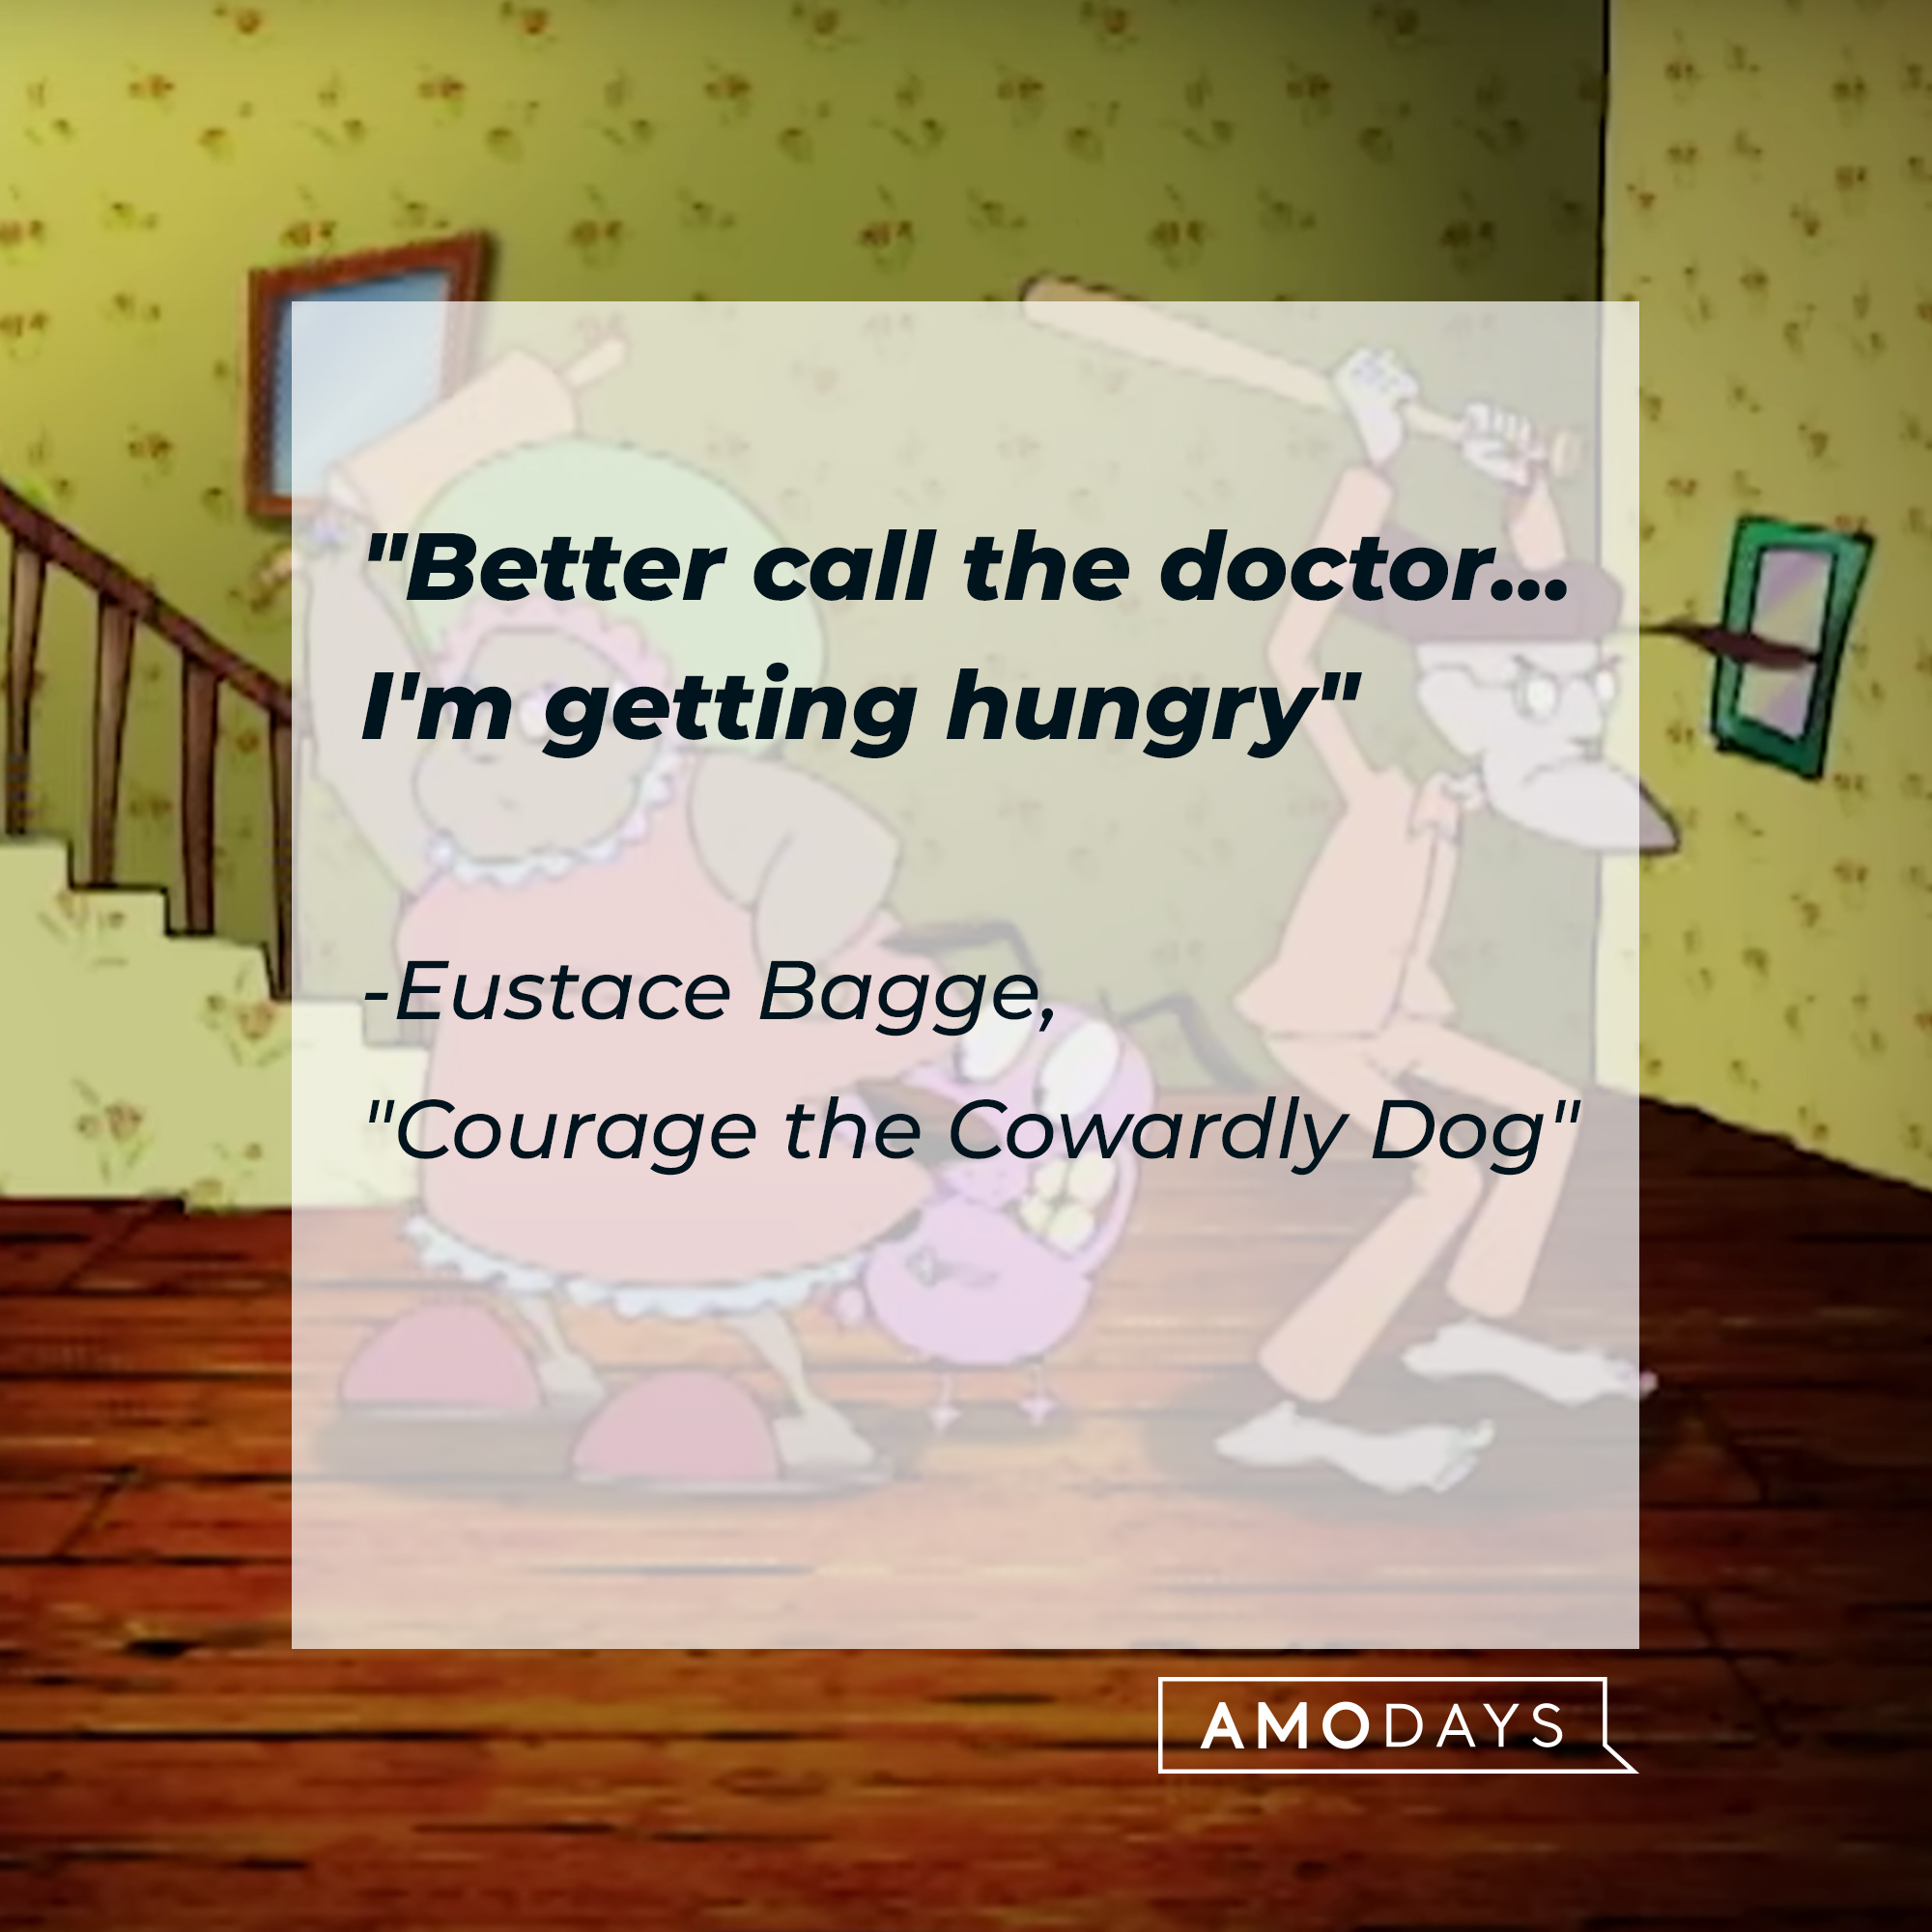 Eustace's quote: "Better call the doctor... I'm getting hungry" | Source: Facebook.com/CartoonNetwork